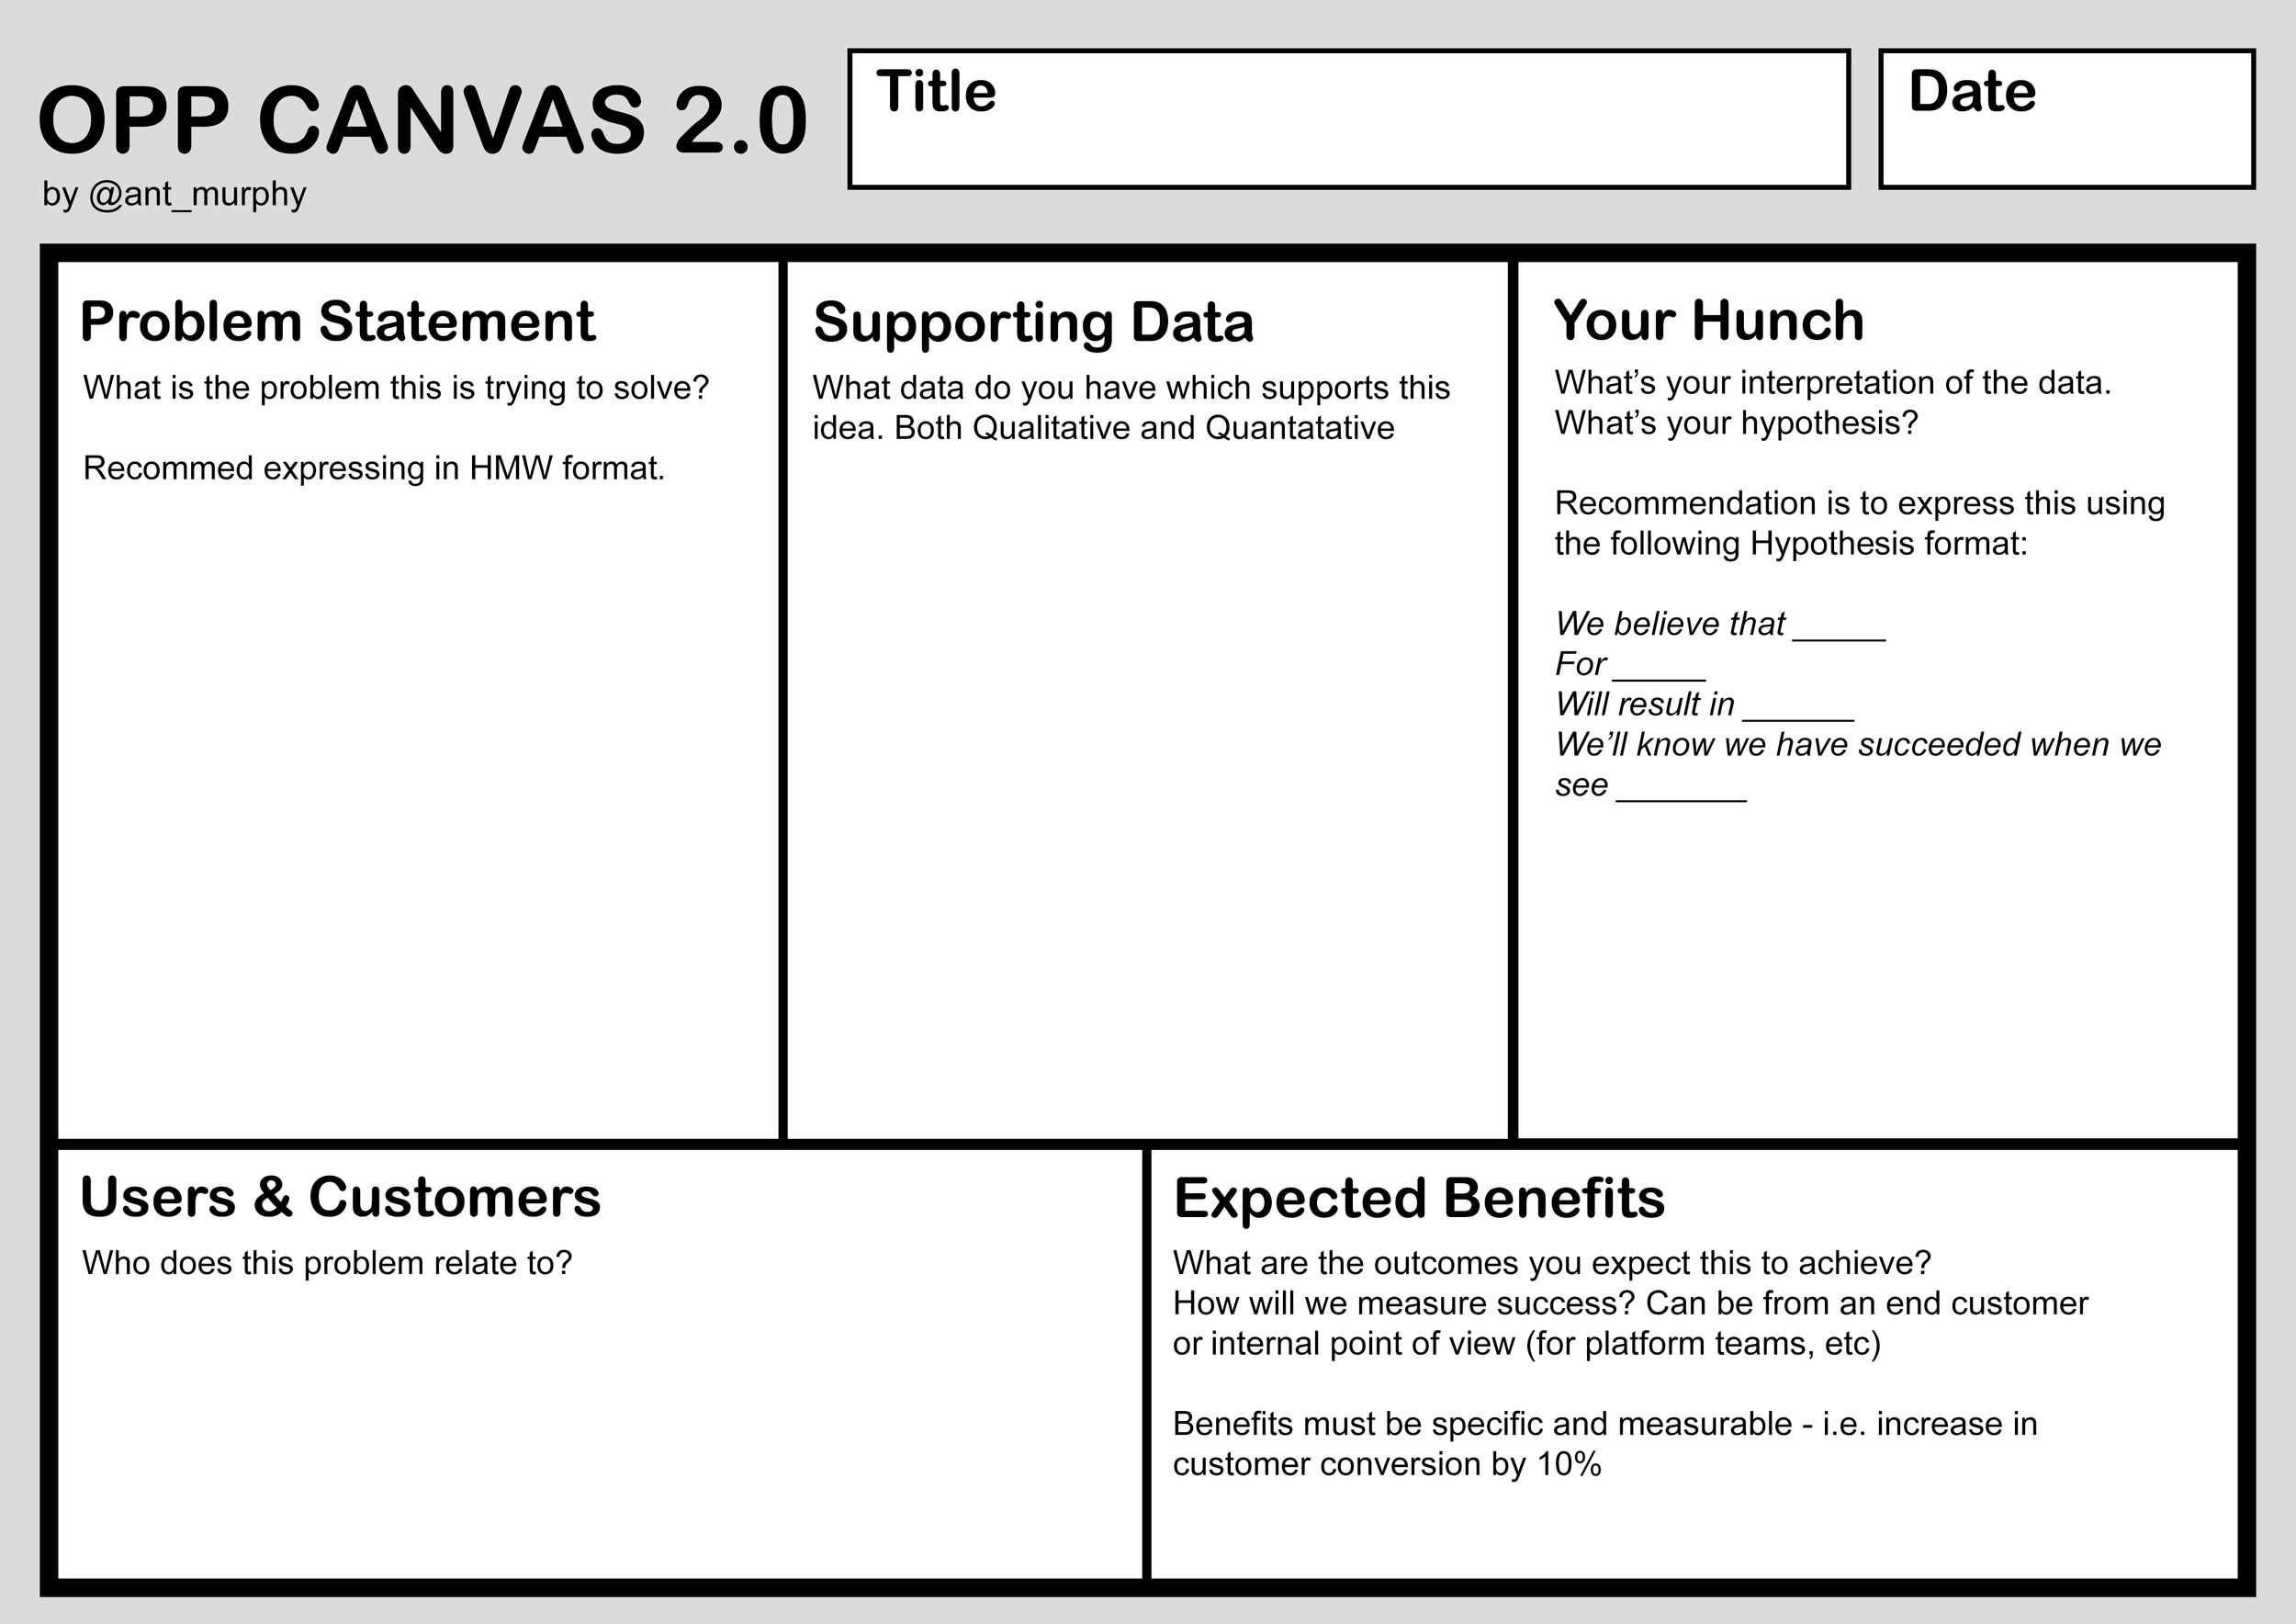 Html2canvas. Product opportunity Canvas. Lean UX Canvas. Problem Statement Canvas. Питч канвас.